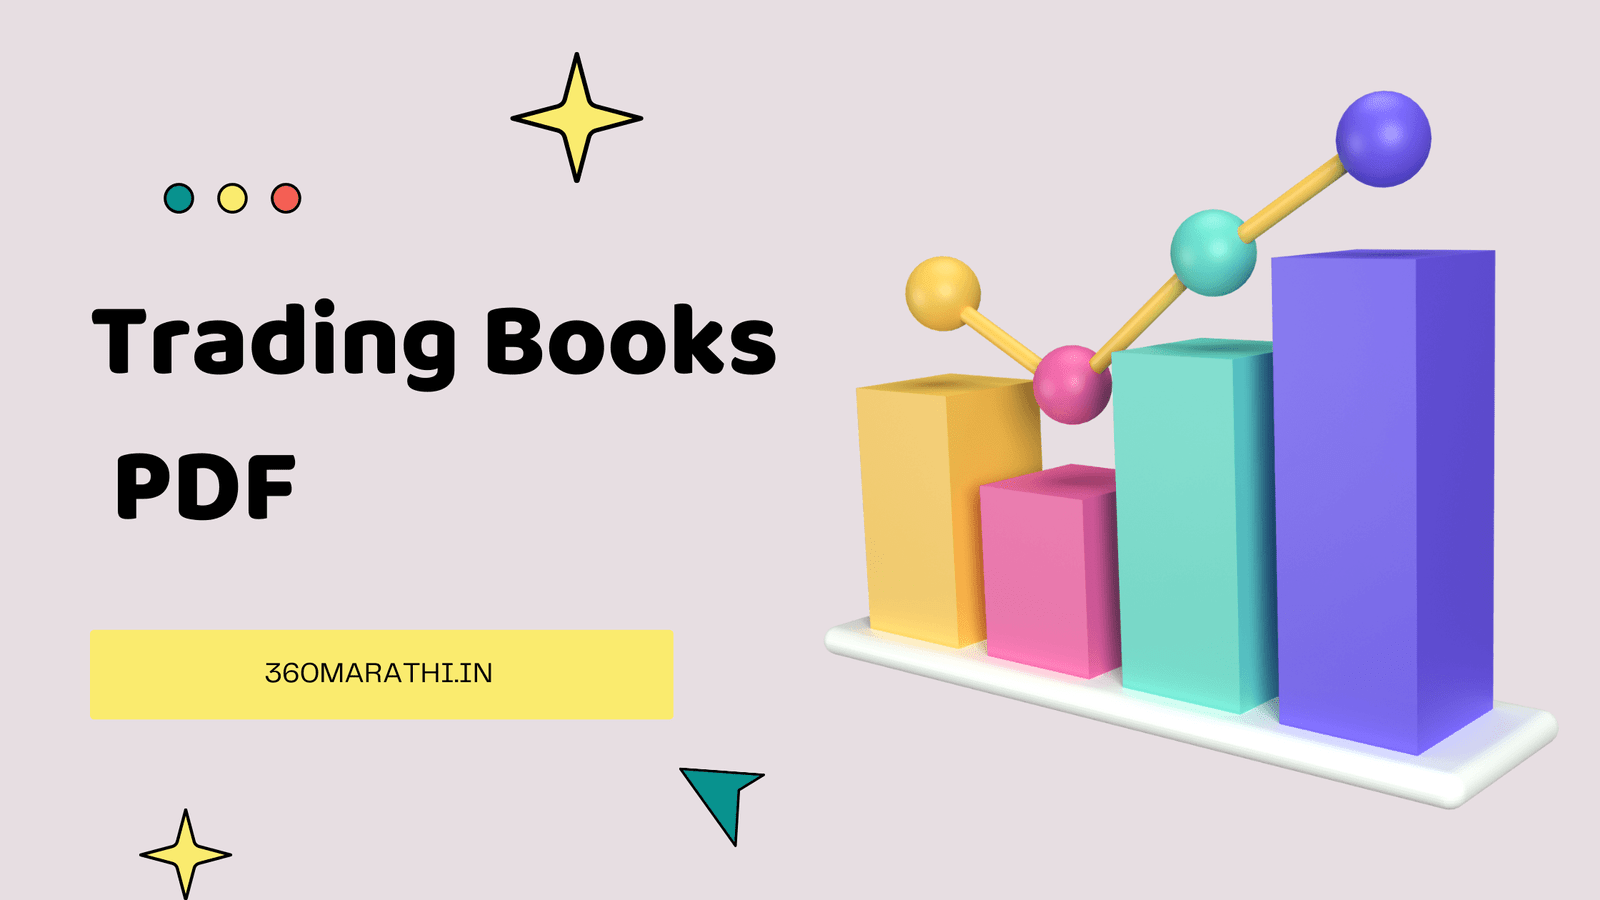 Trading Books PDF - Price Action, Strategies & Candlestick Patterns